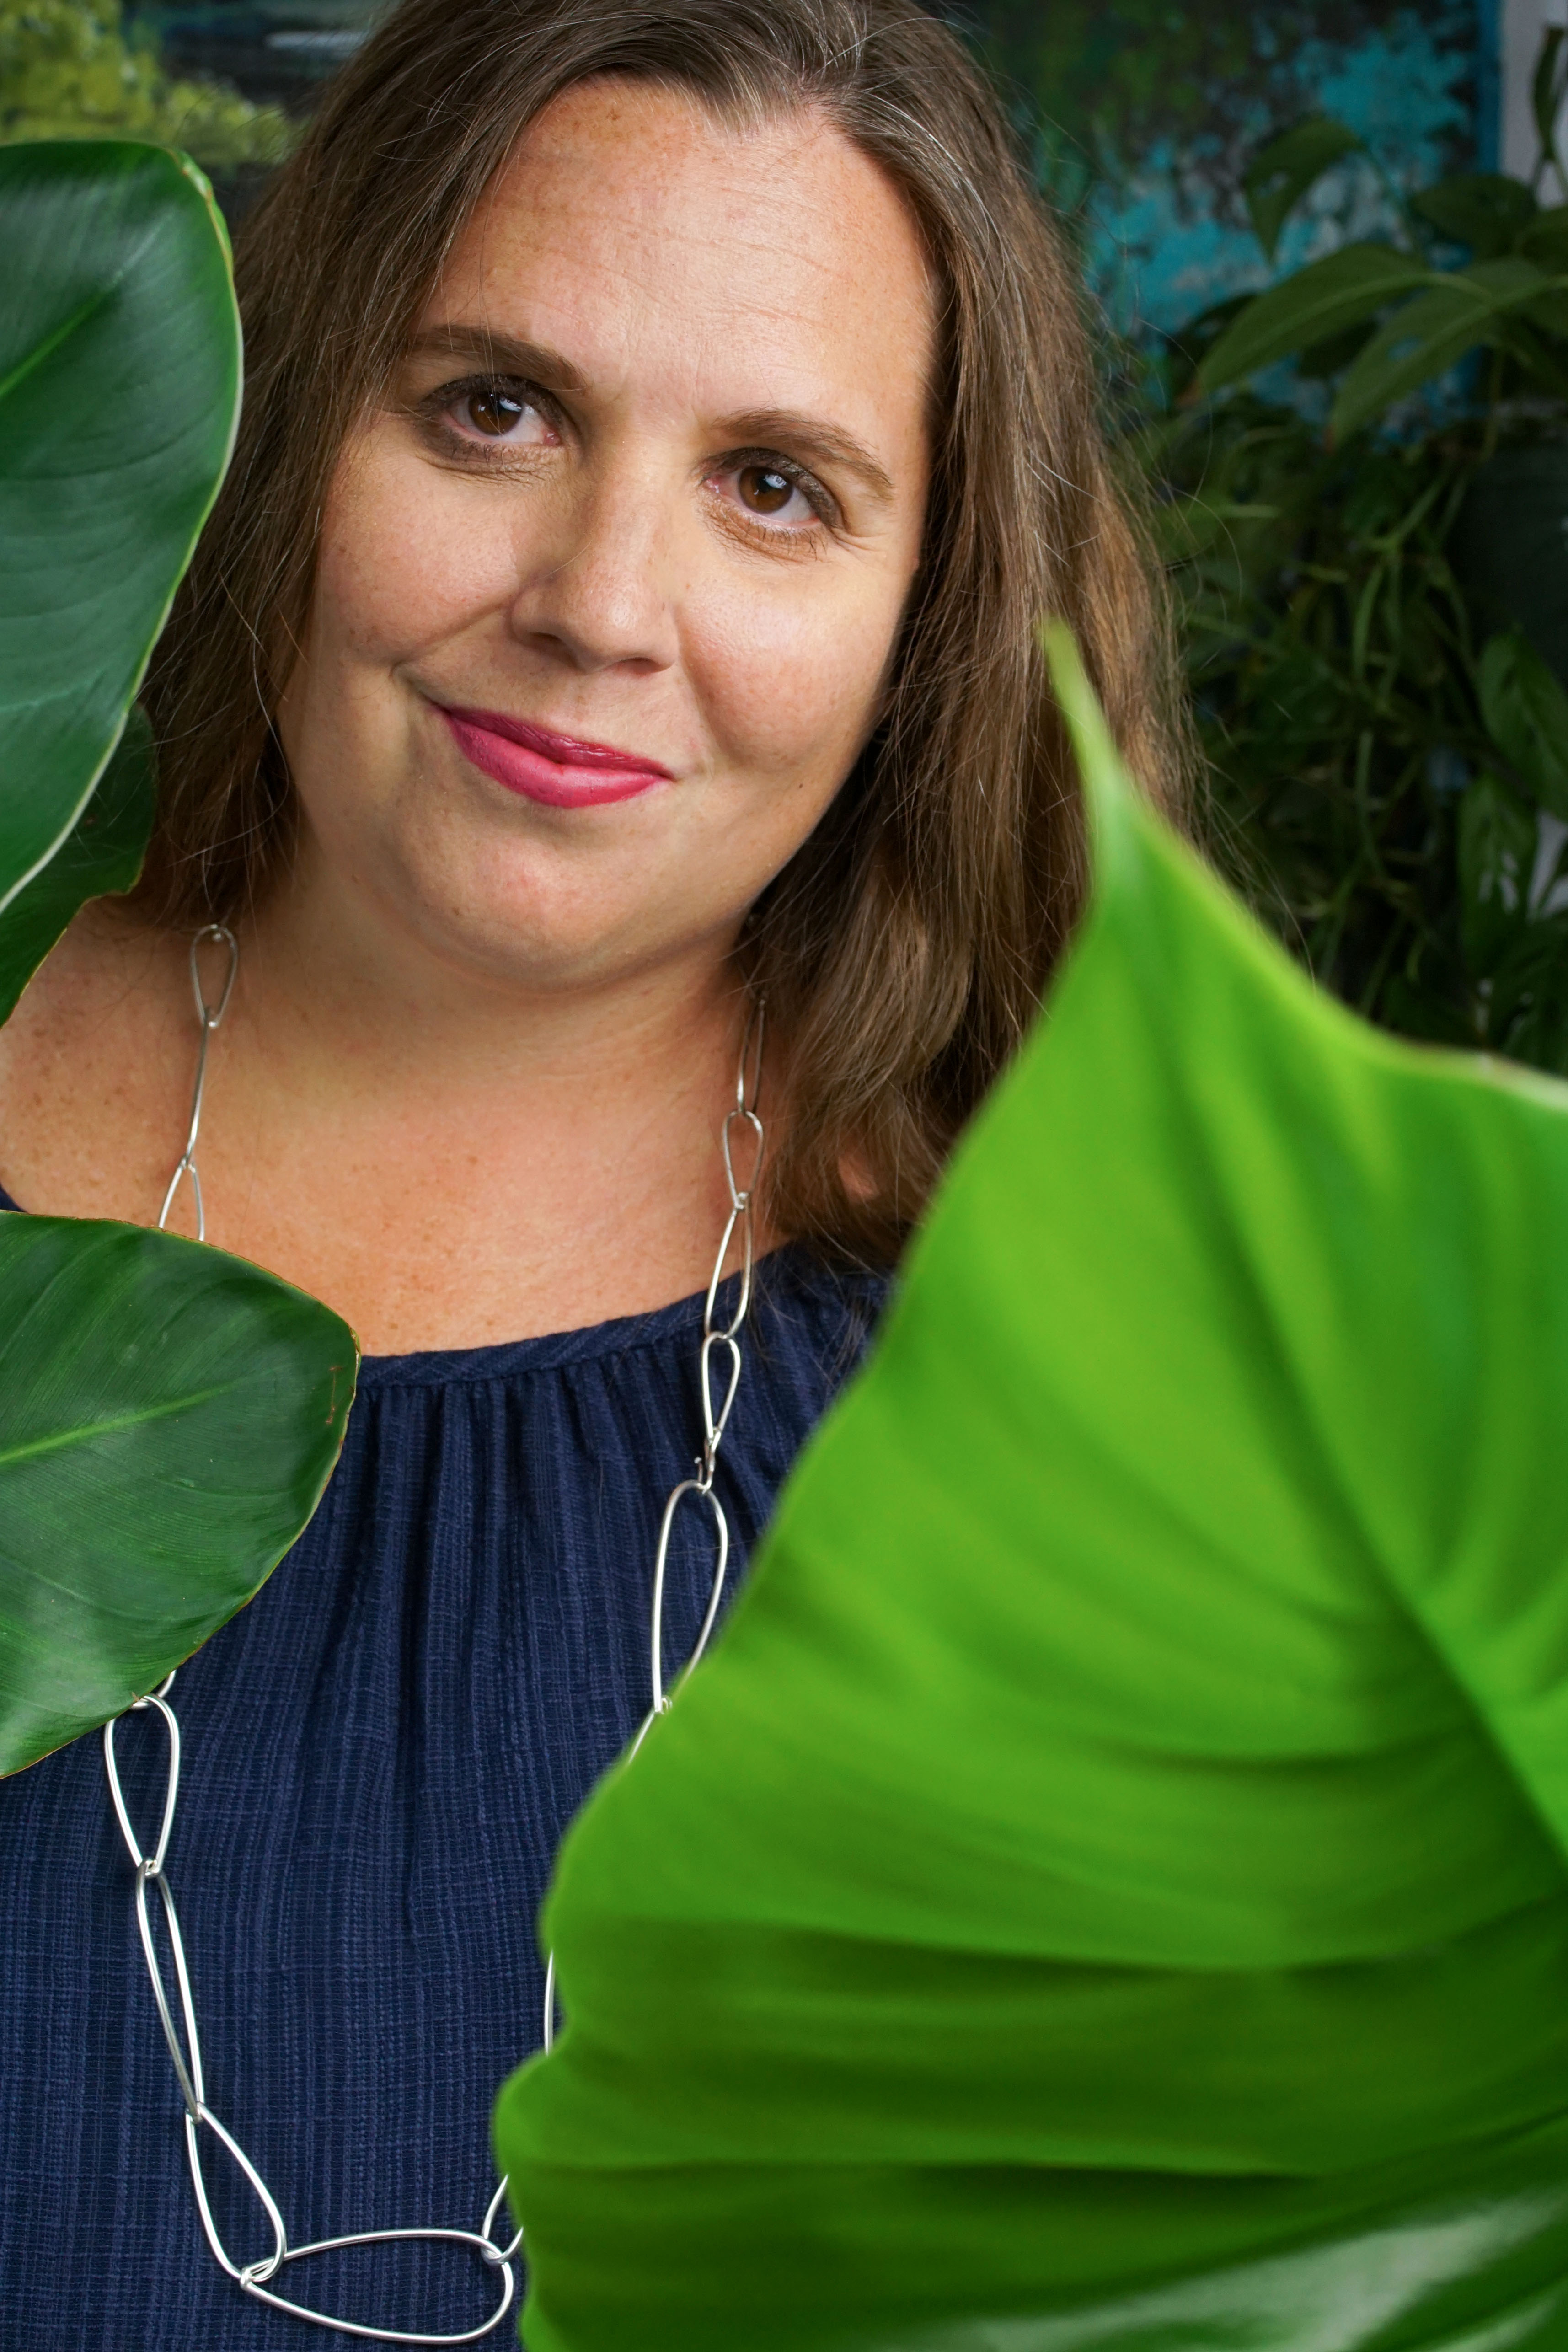 self portrait of woman wearing a blue dress and long silver chain necklace standing behind a philodendron giganteum and a bird of paradise house plants